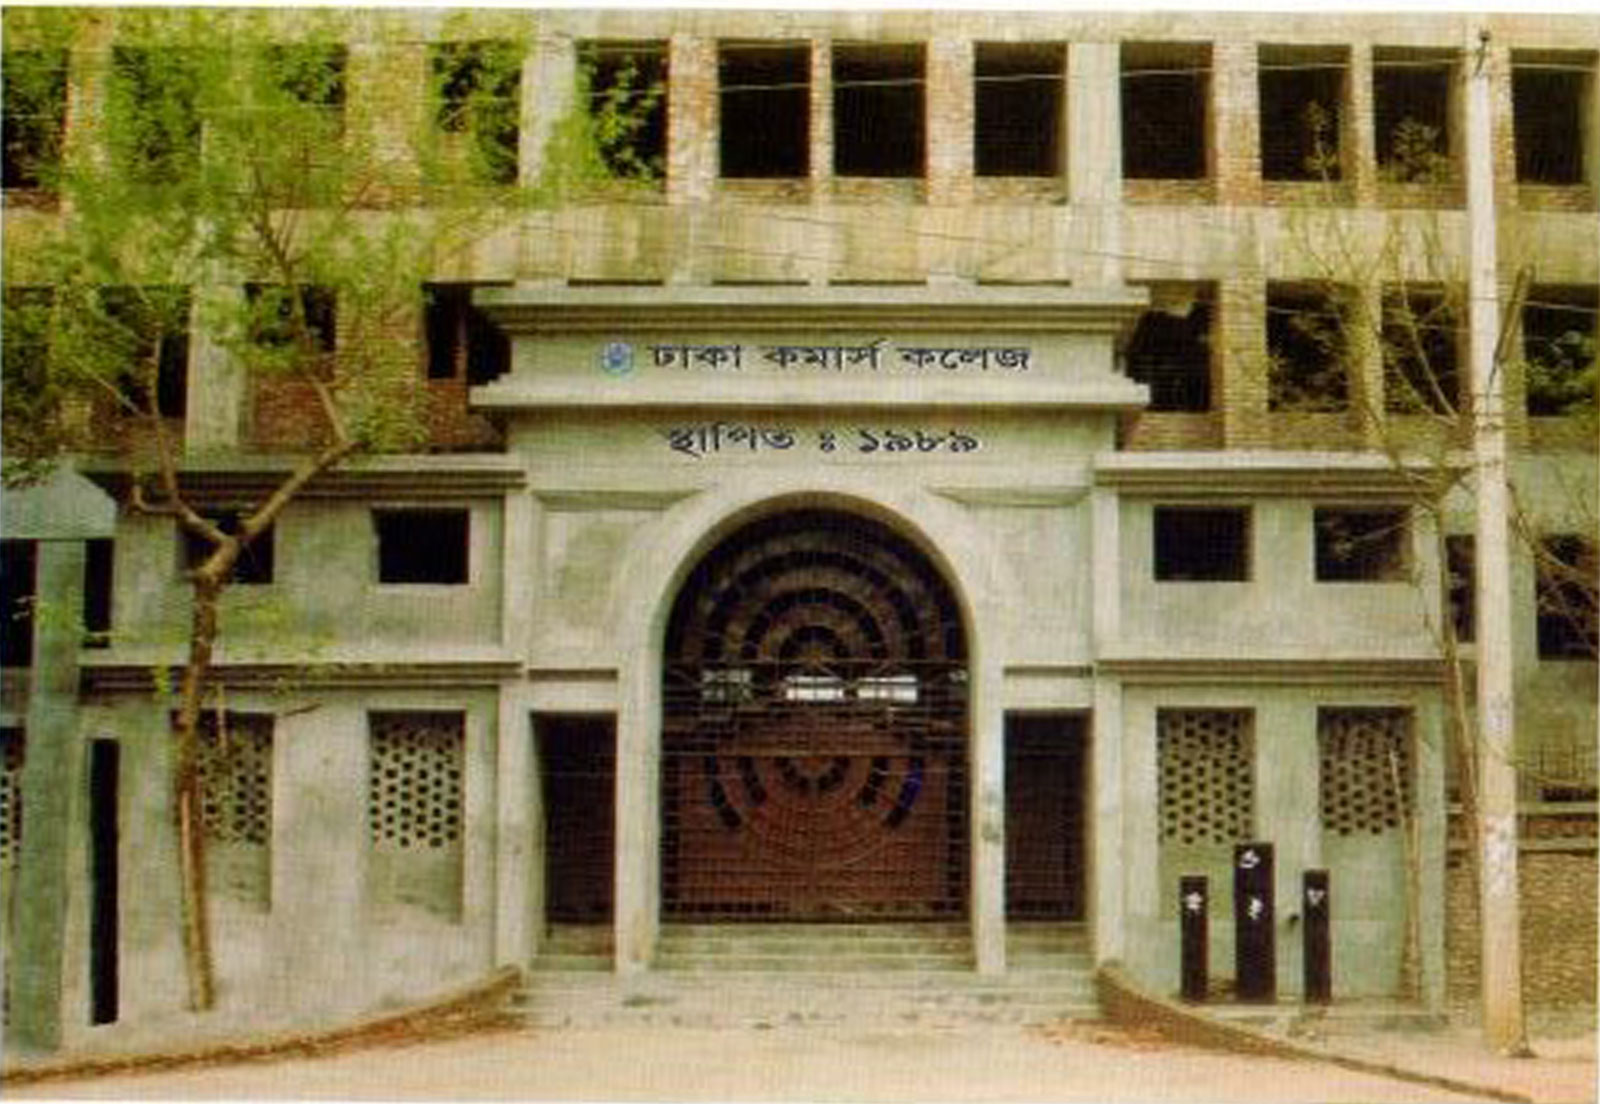 Dhaka Commerce College at a Glance